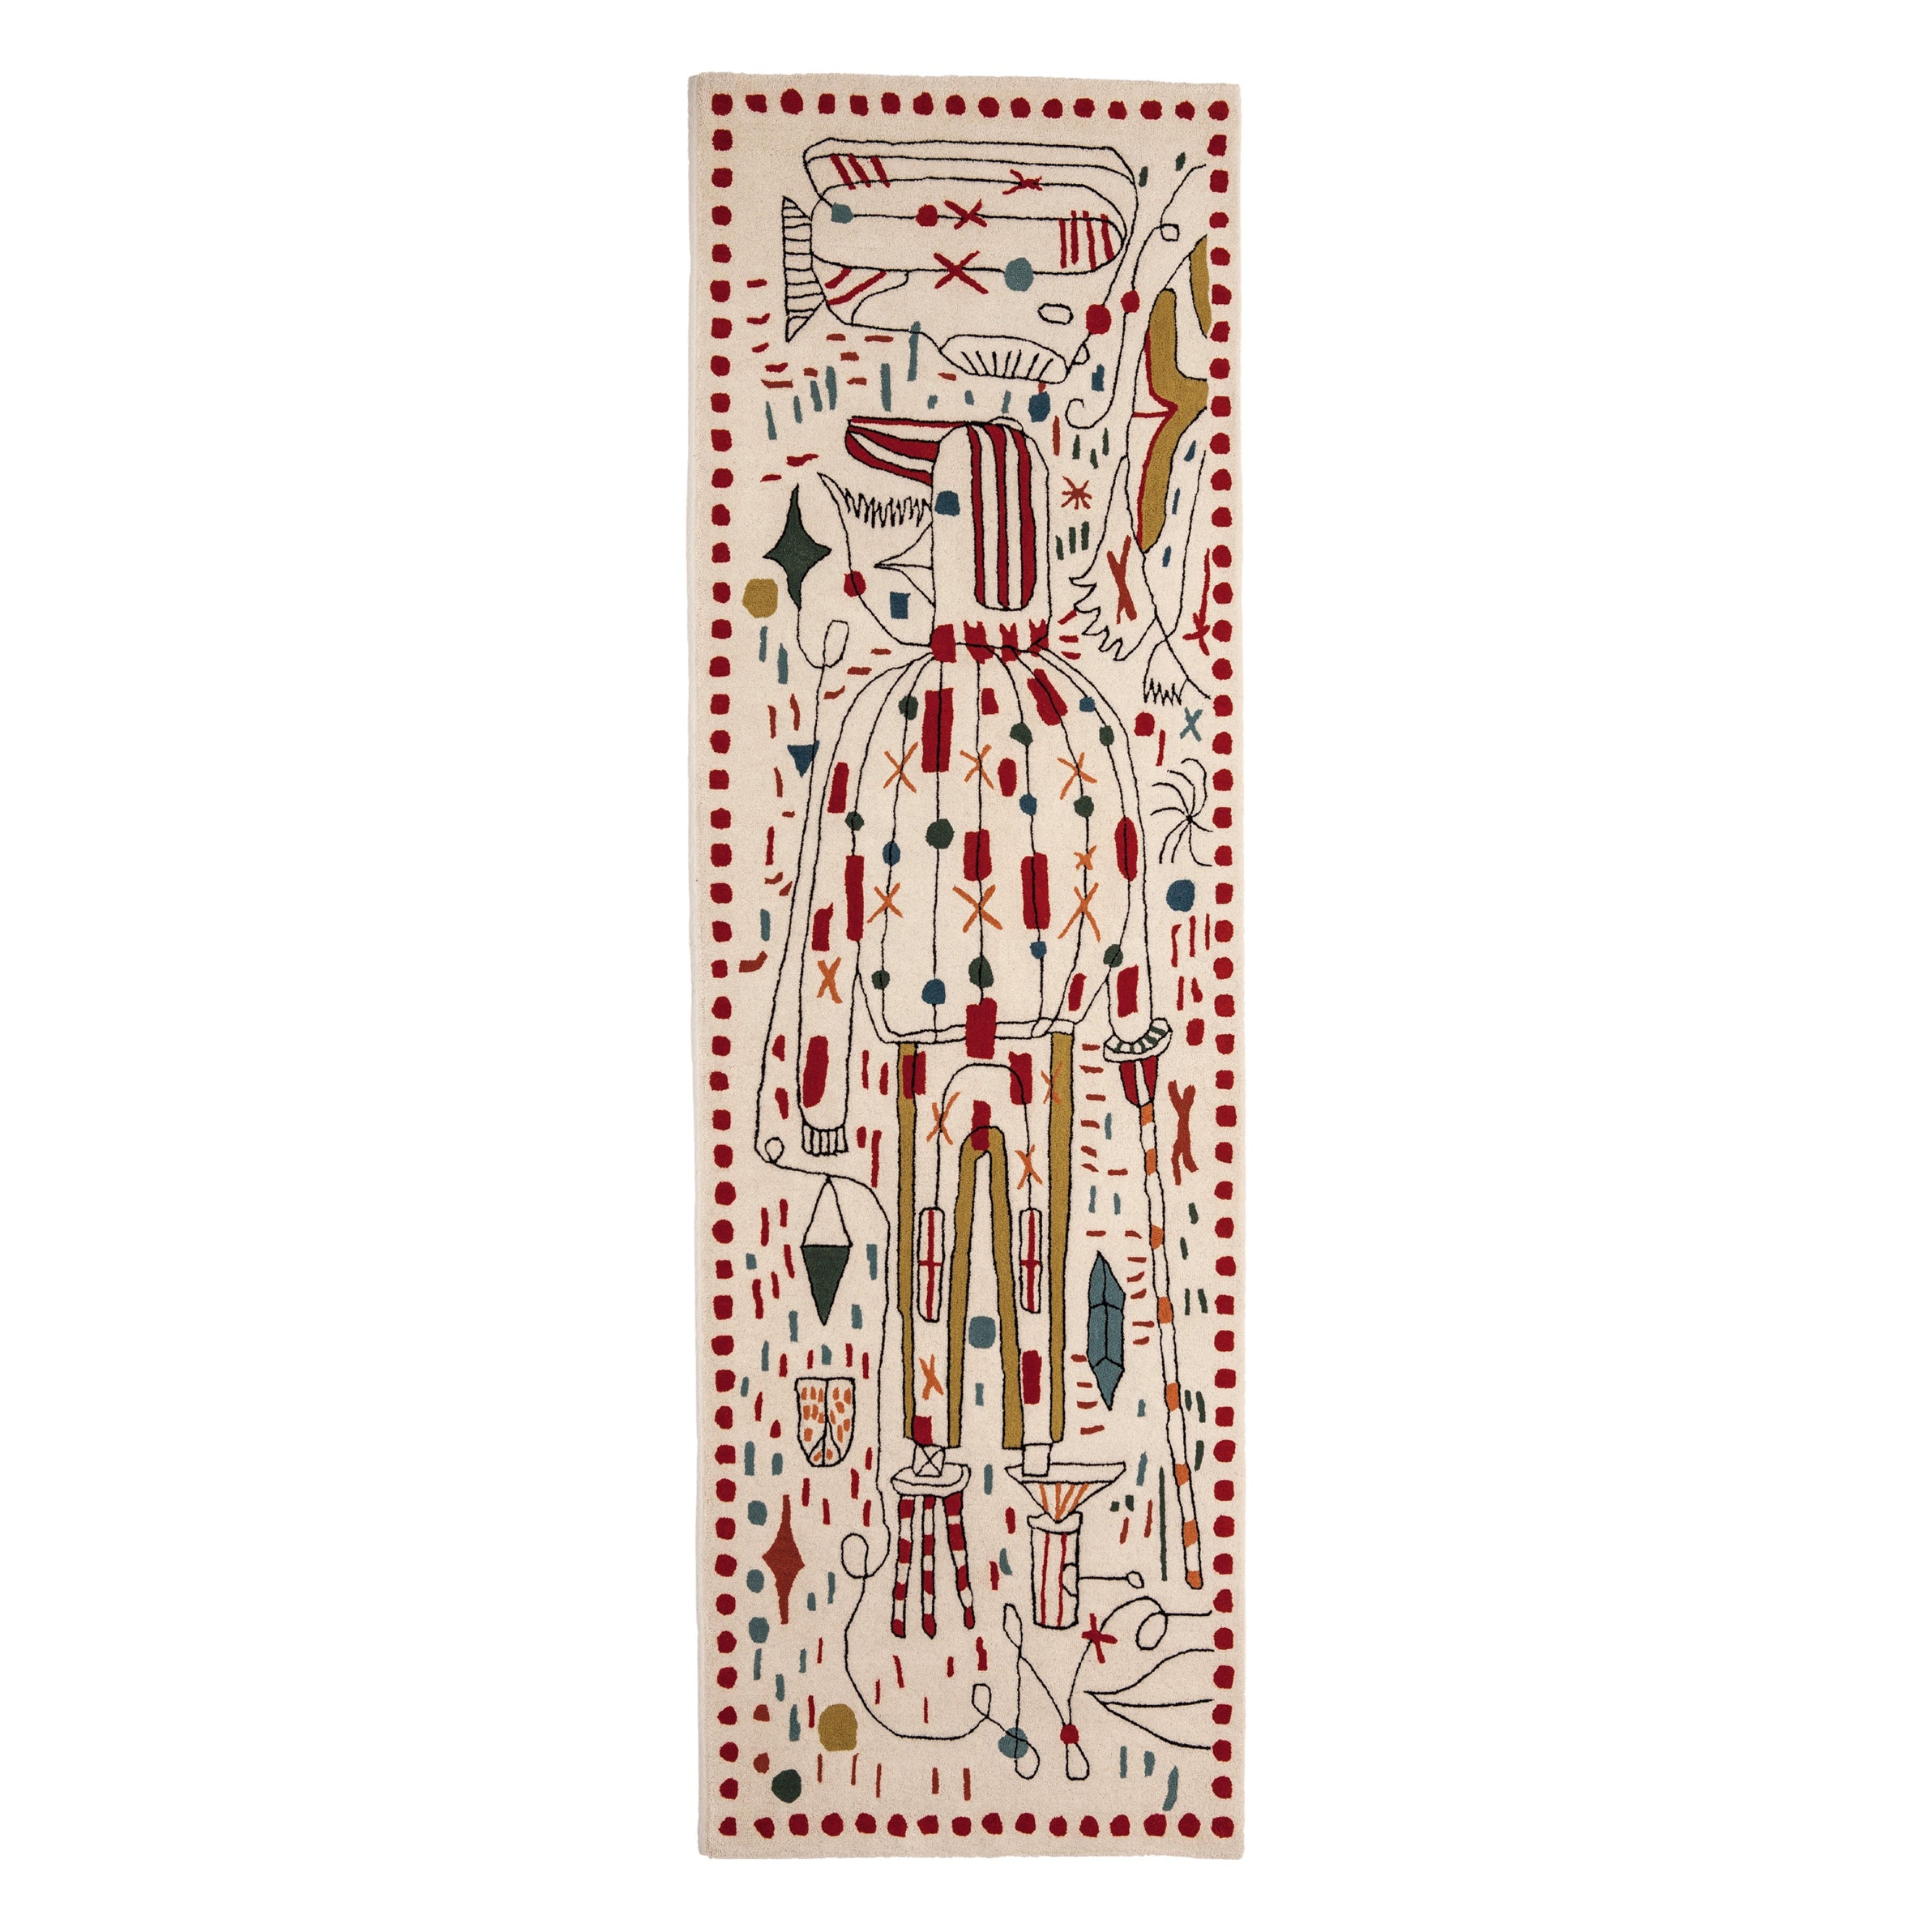 'Hayon x Nani' Hand-Tufted Runner by Jaime Hayon for Nanimarquina For Sale